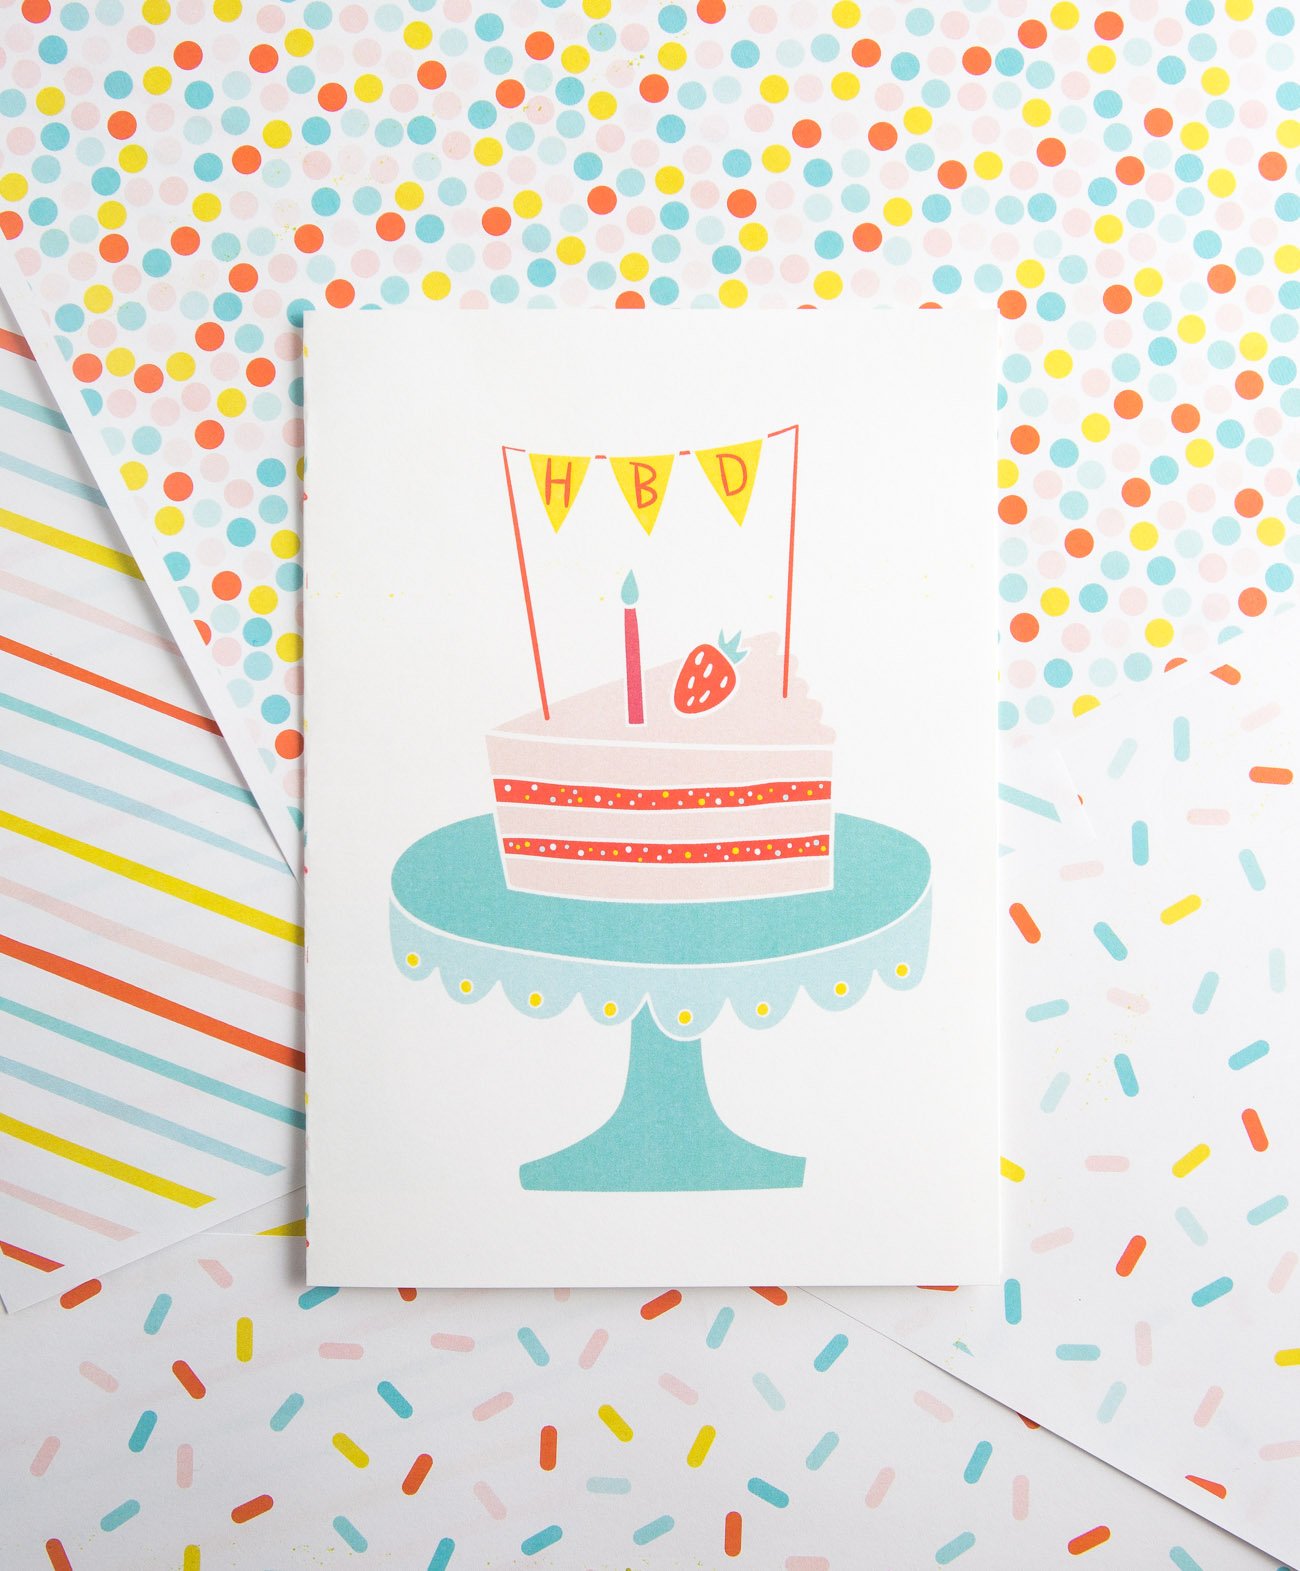 Free Printable Cake Birthday Card - slice of cake on cake stand with HBD pennant banner